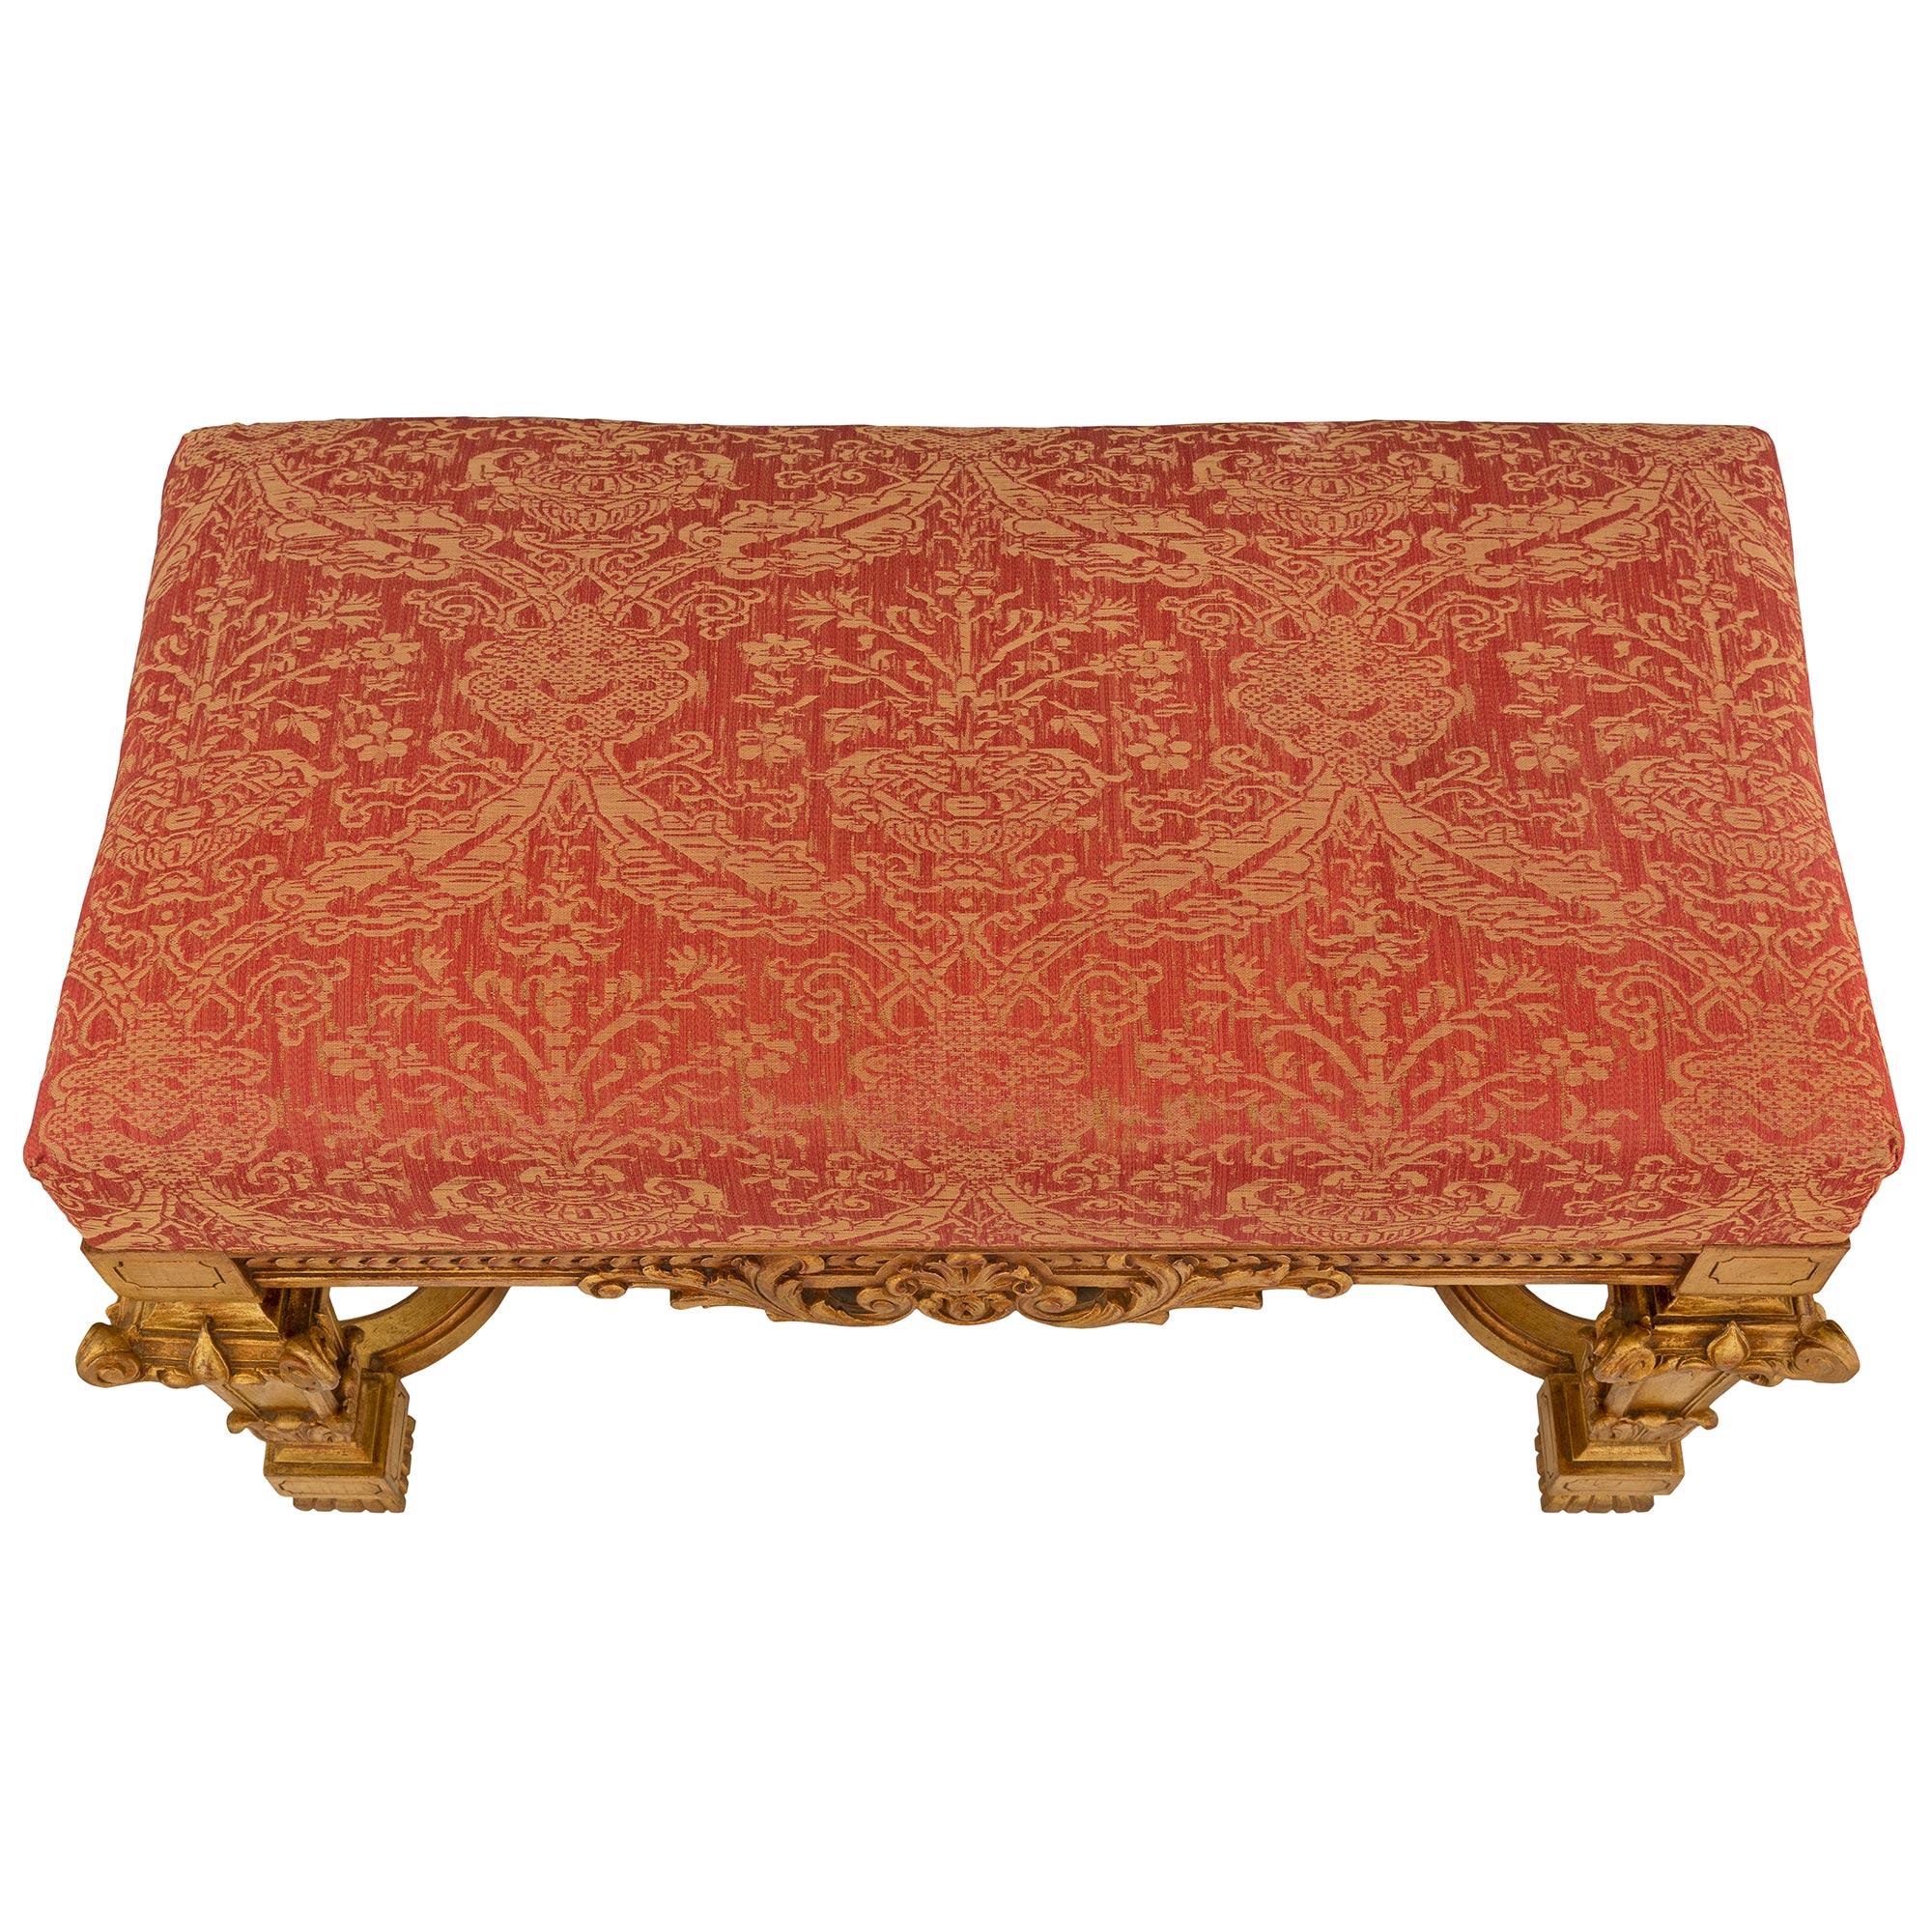 An impressive and most decorative pair of Italian turn-of-the-century Louis XIV st. mecca benches. Each bench is raised by fine reeded gadroon feet below block reserves each connected by a scalloped shape stretcher with an elegant curved design